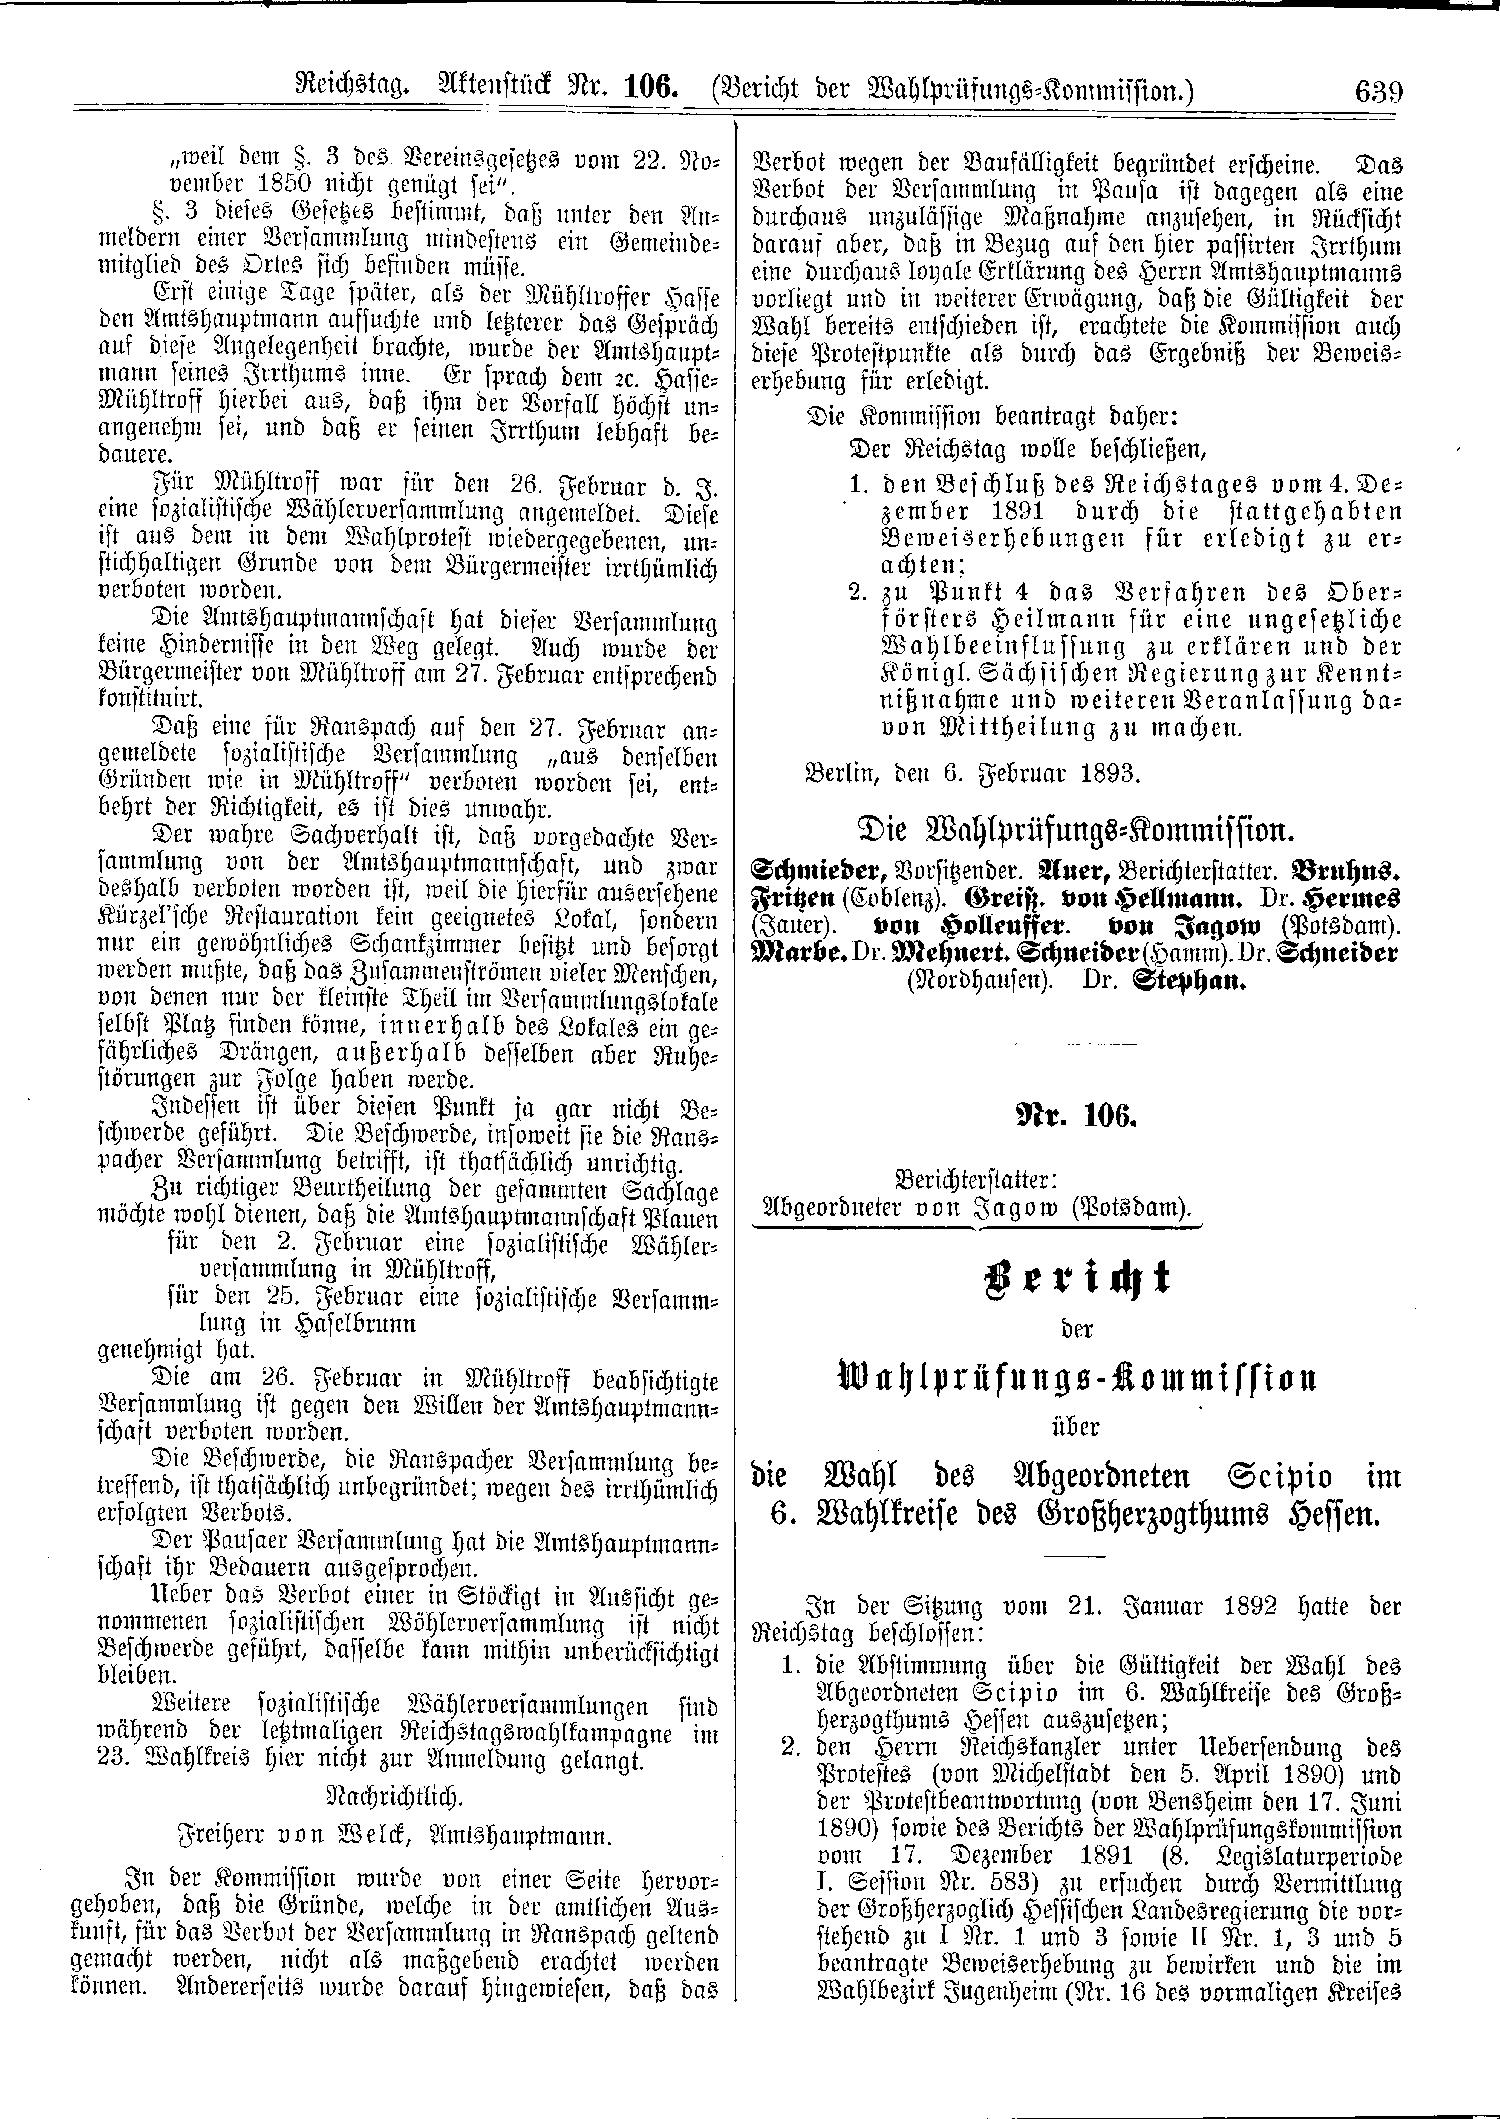 Scan of page 639